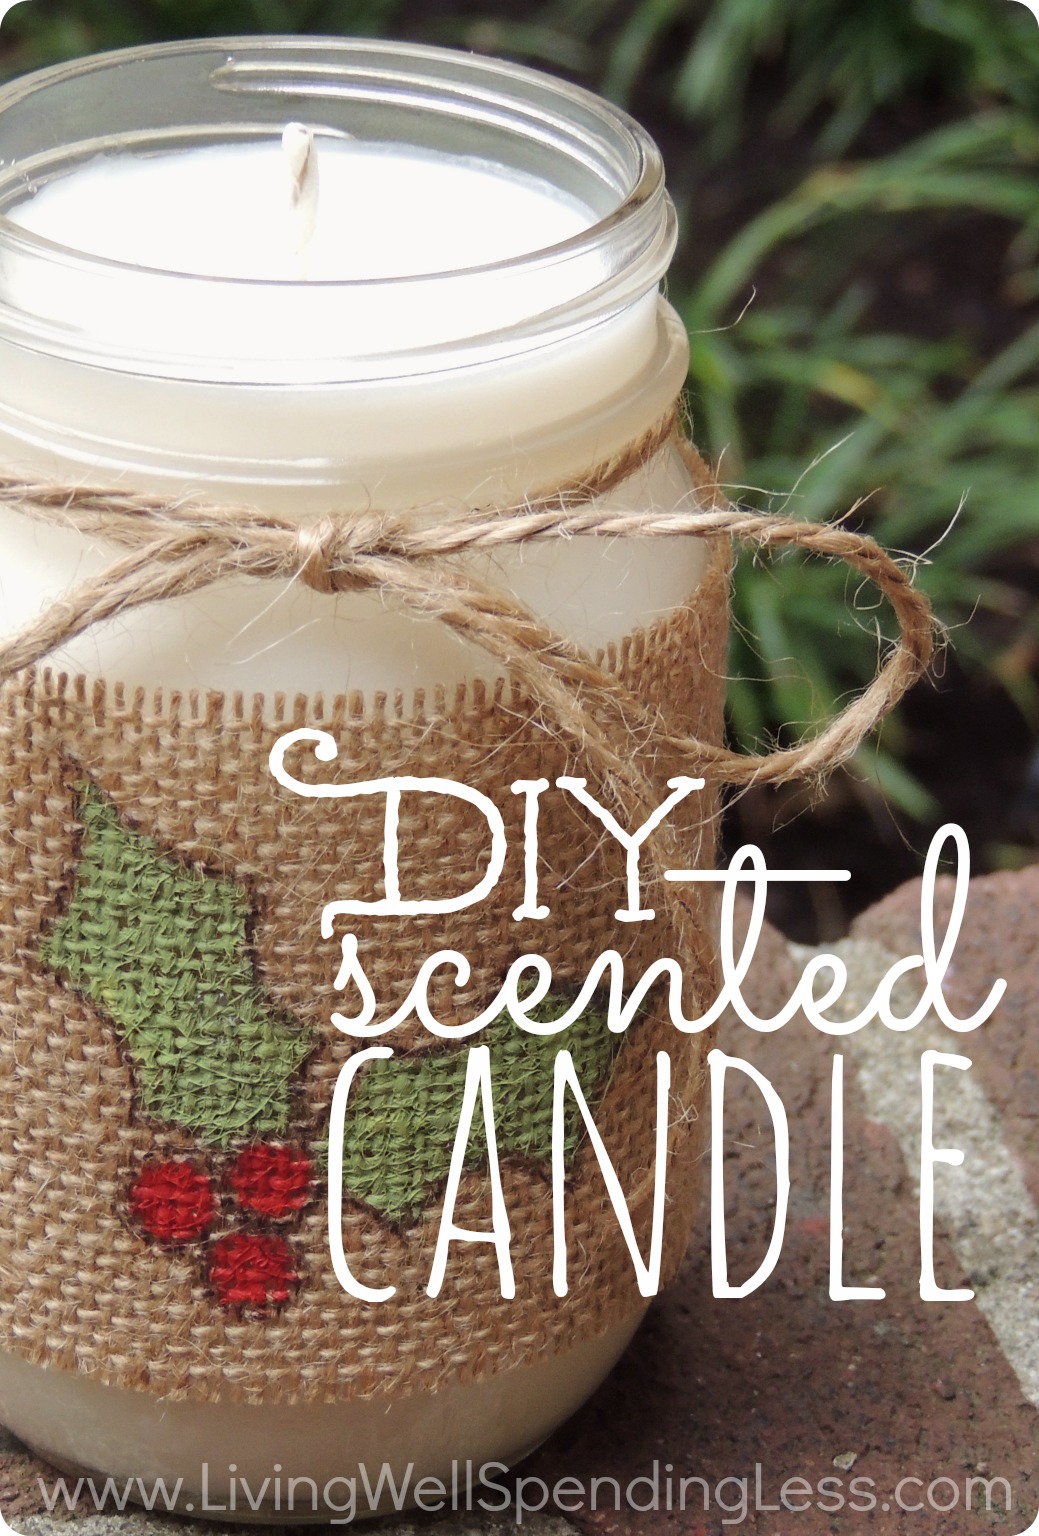 Diy scented candles